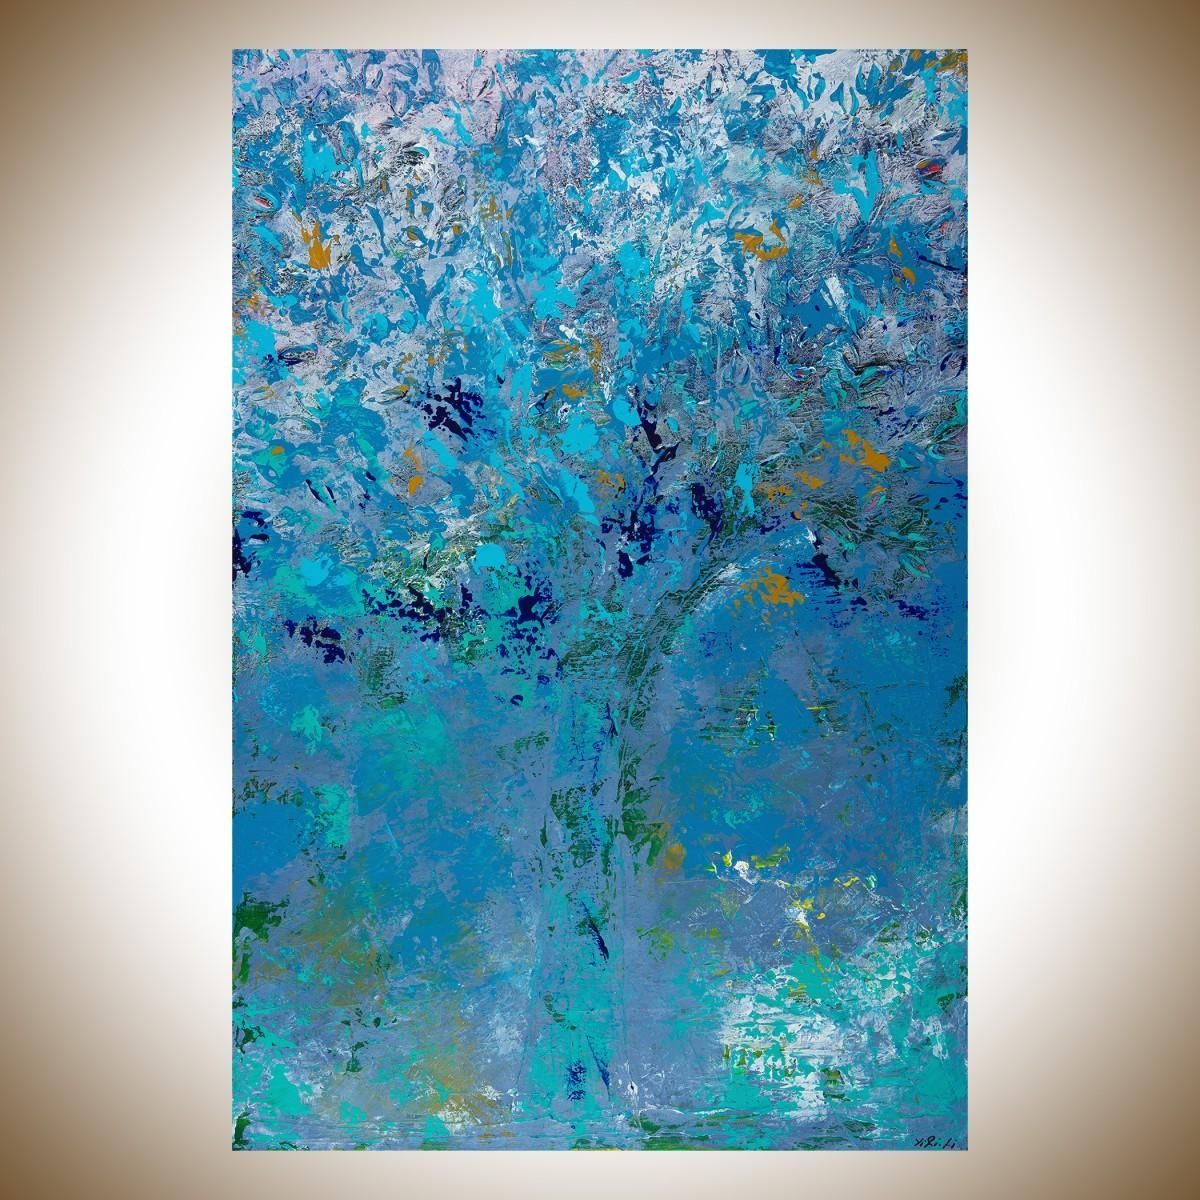 First Snowfallqiqigallery 36"x24" Original Modern Contemporary In Teal And Black Wall Art (View 3 of 20)